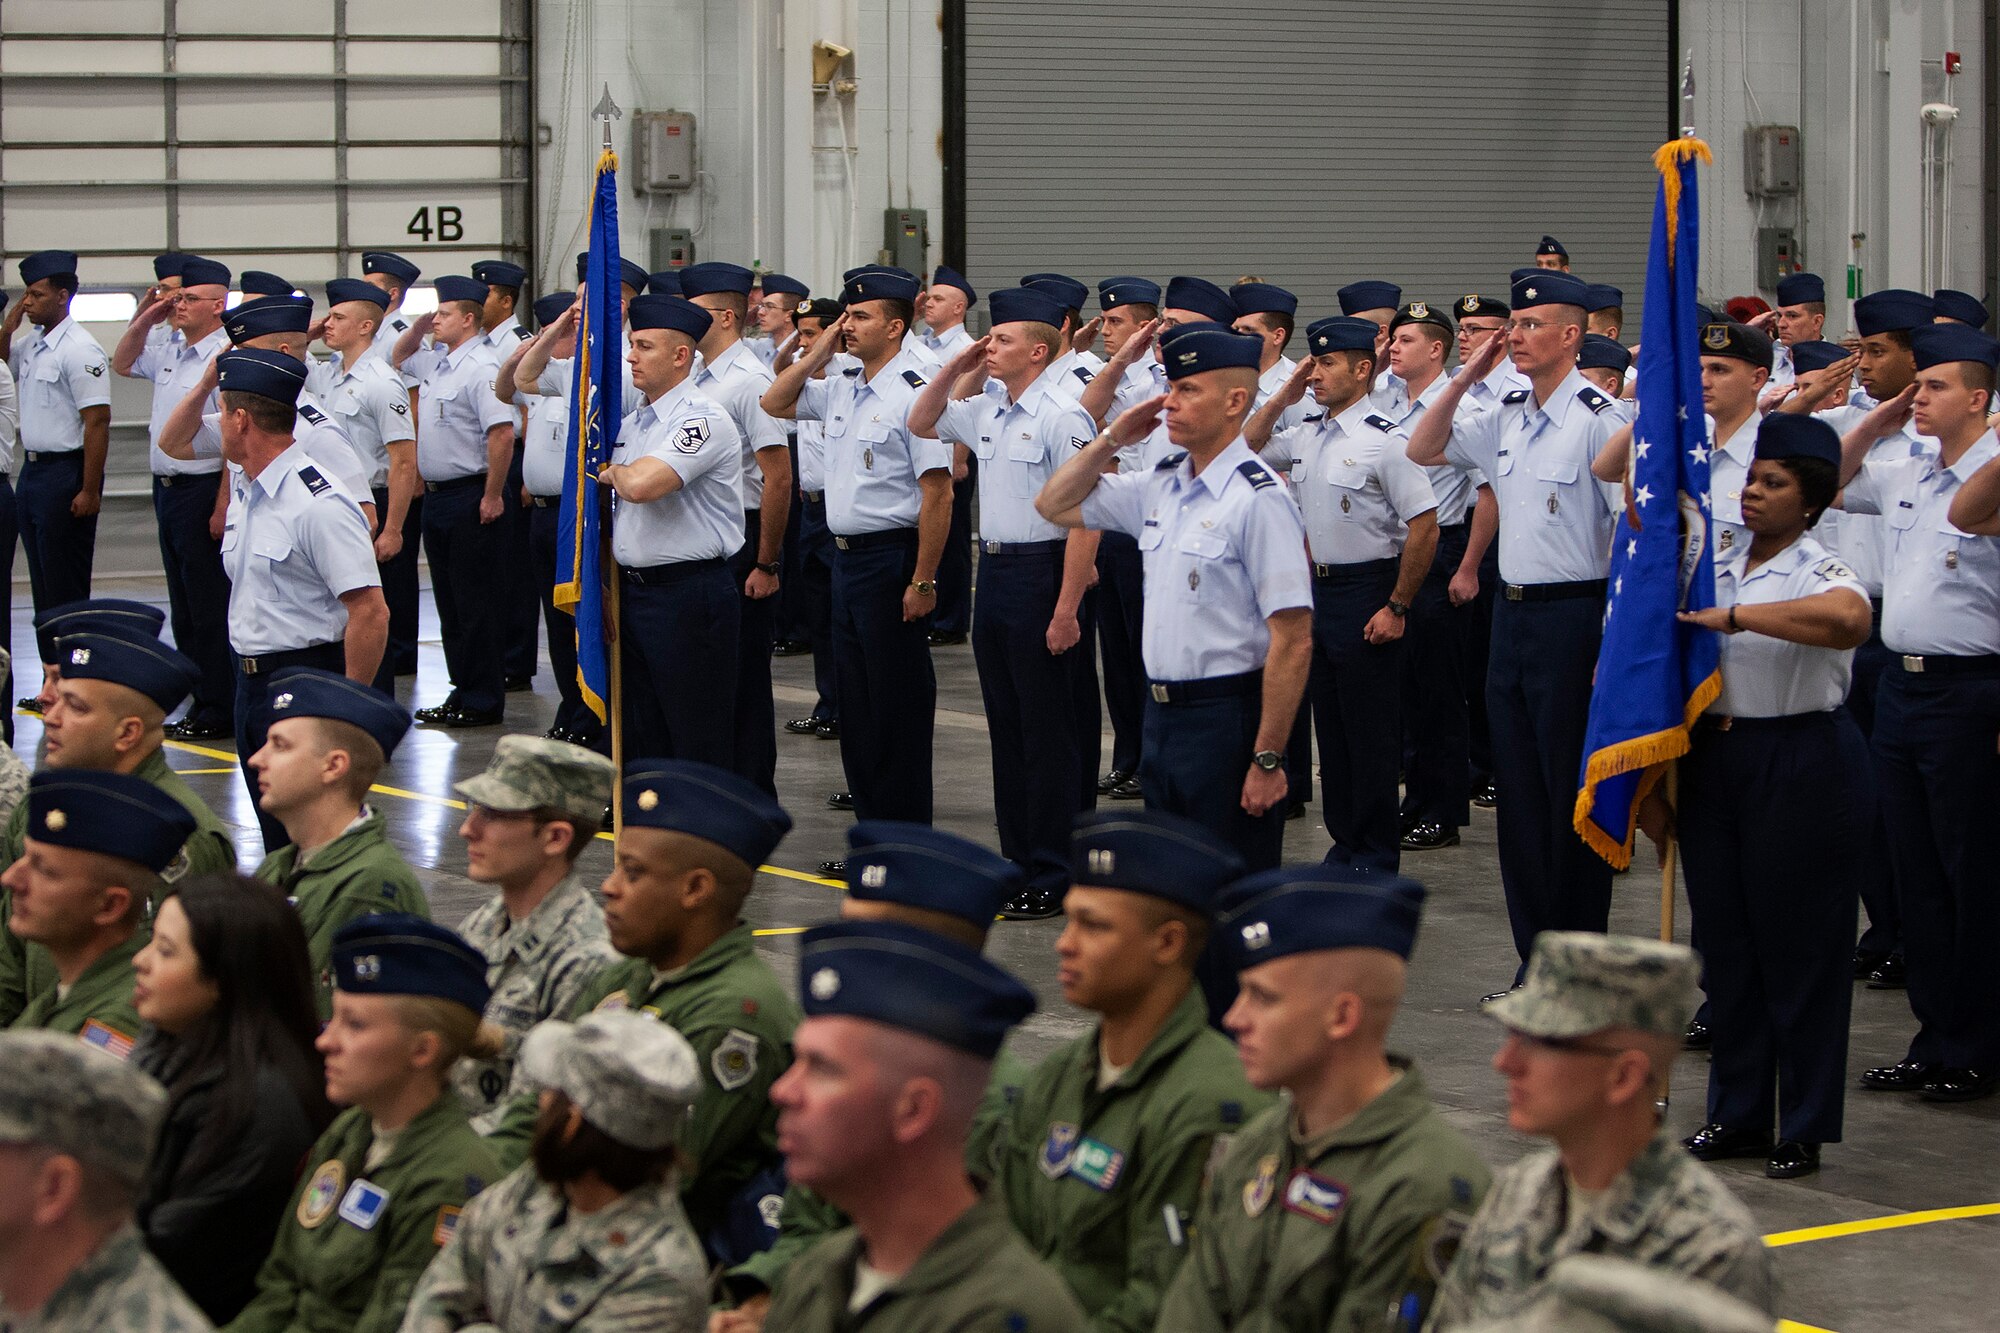 A formation of Airmen renders the first salute to Maj. Gen. Anthony J. Cotton, as Cotton takes command of the 20th Air Force, which is responsible for the nation's three Intercontinental Ballistic Missile wings and one nuclear operations support wing, during a change of command ceremony at F.E. Warren Air Force Base, Nov. 16, 2015. Cotton also assumed command of Task Force 214, which reports to U.S. Strategic Command. TF 214 provides the President of the United States with responsive and highly reliable strategic missile forces, and supports USSTRATCOM's strategic deterrence mission. USSTRATCOM, one of nine DoD unified combatant commands, relies on various task forces for the execution of its global missions, which also include space operations; cyberspace operations; joint electronic warfare; global strike; missile defense; intelligence, surveillance and reconnaissance; combating weapons of mass destruction; and analysis and targeting. (U.S. Air Force photo by Lan Kim)